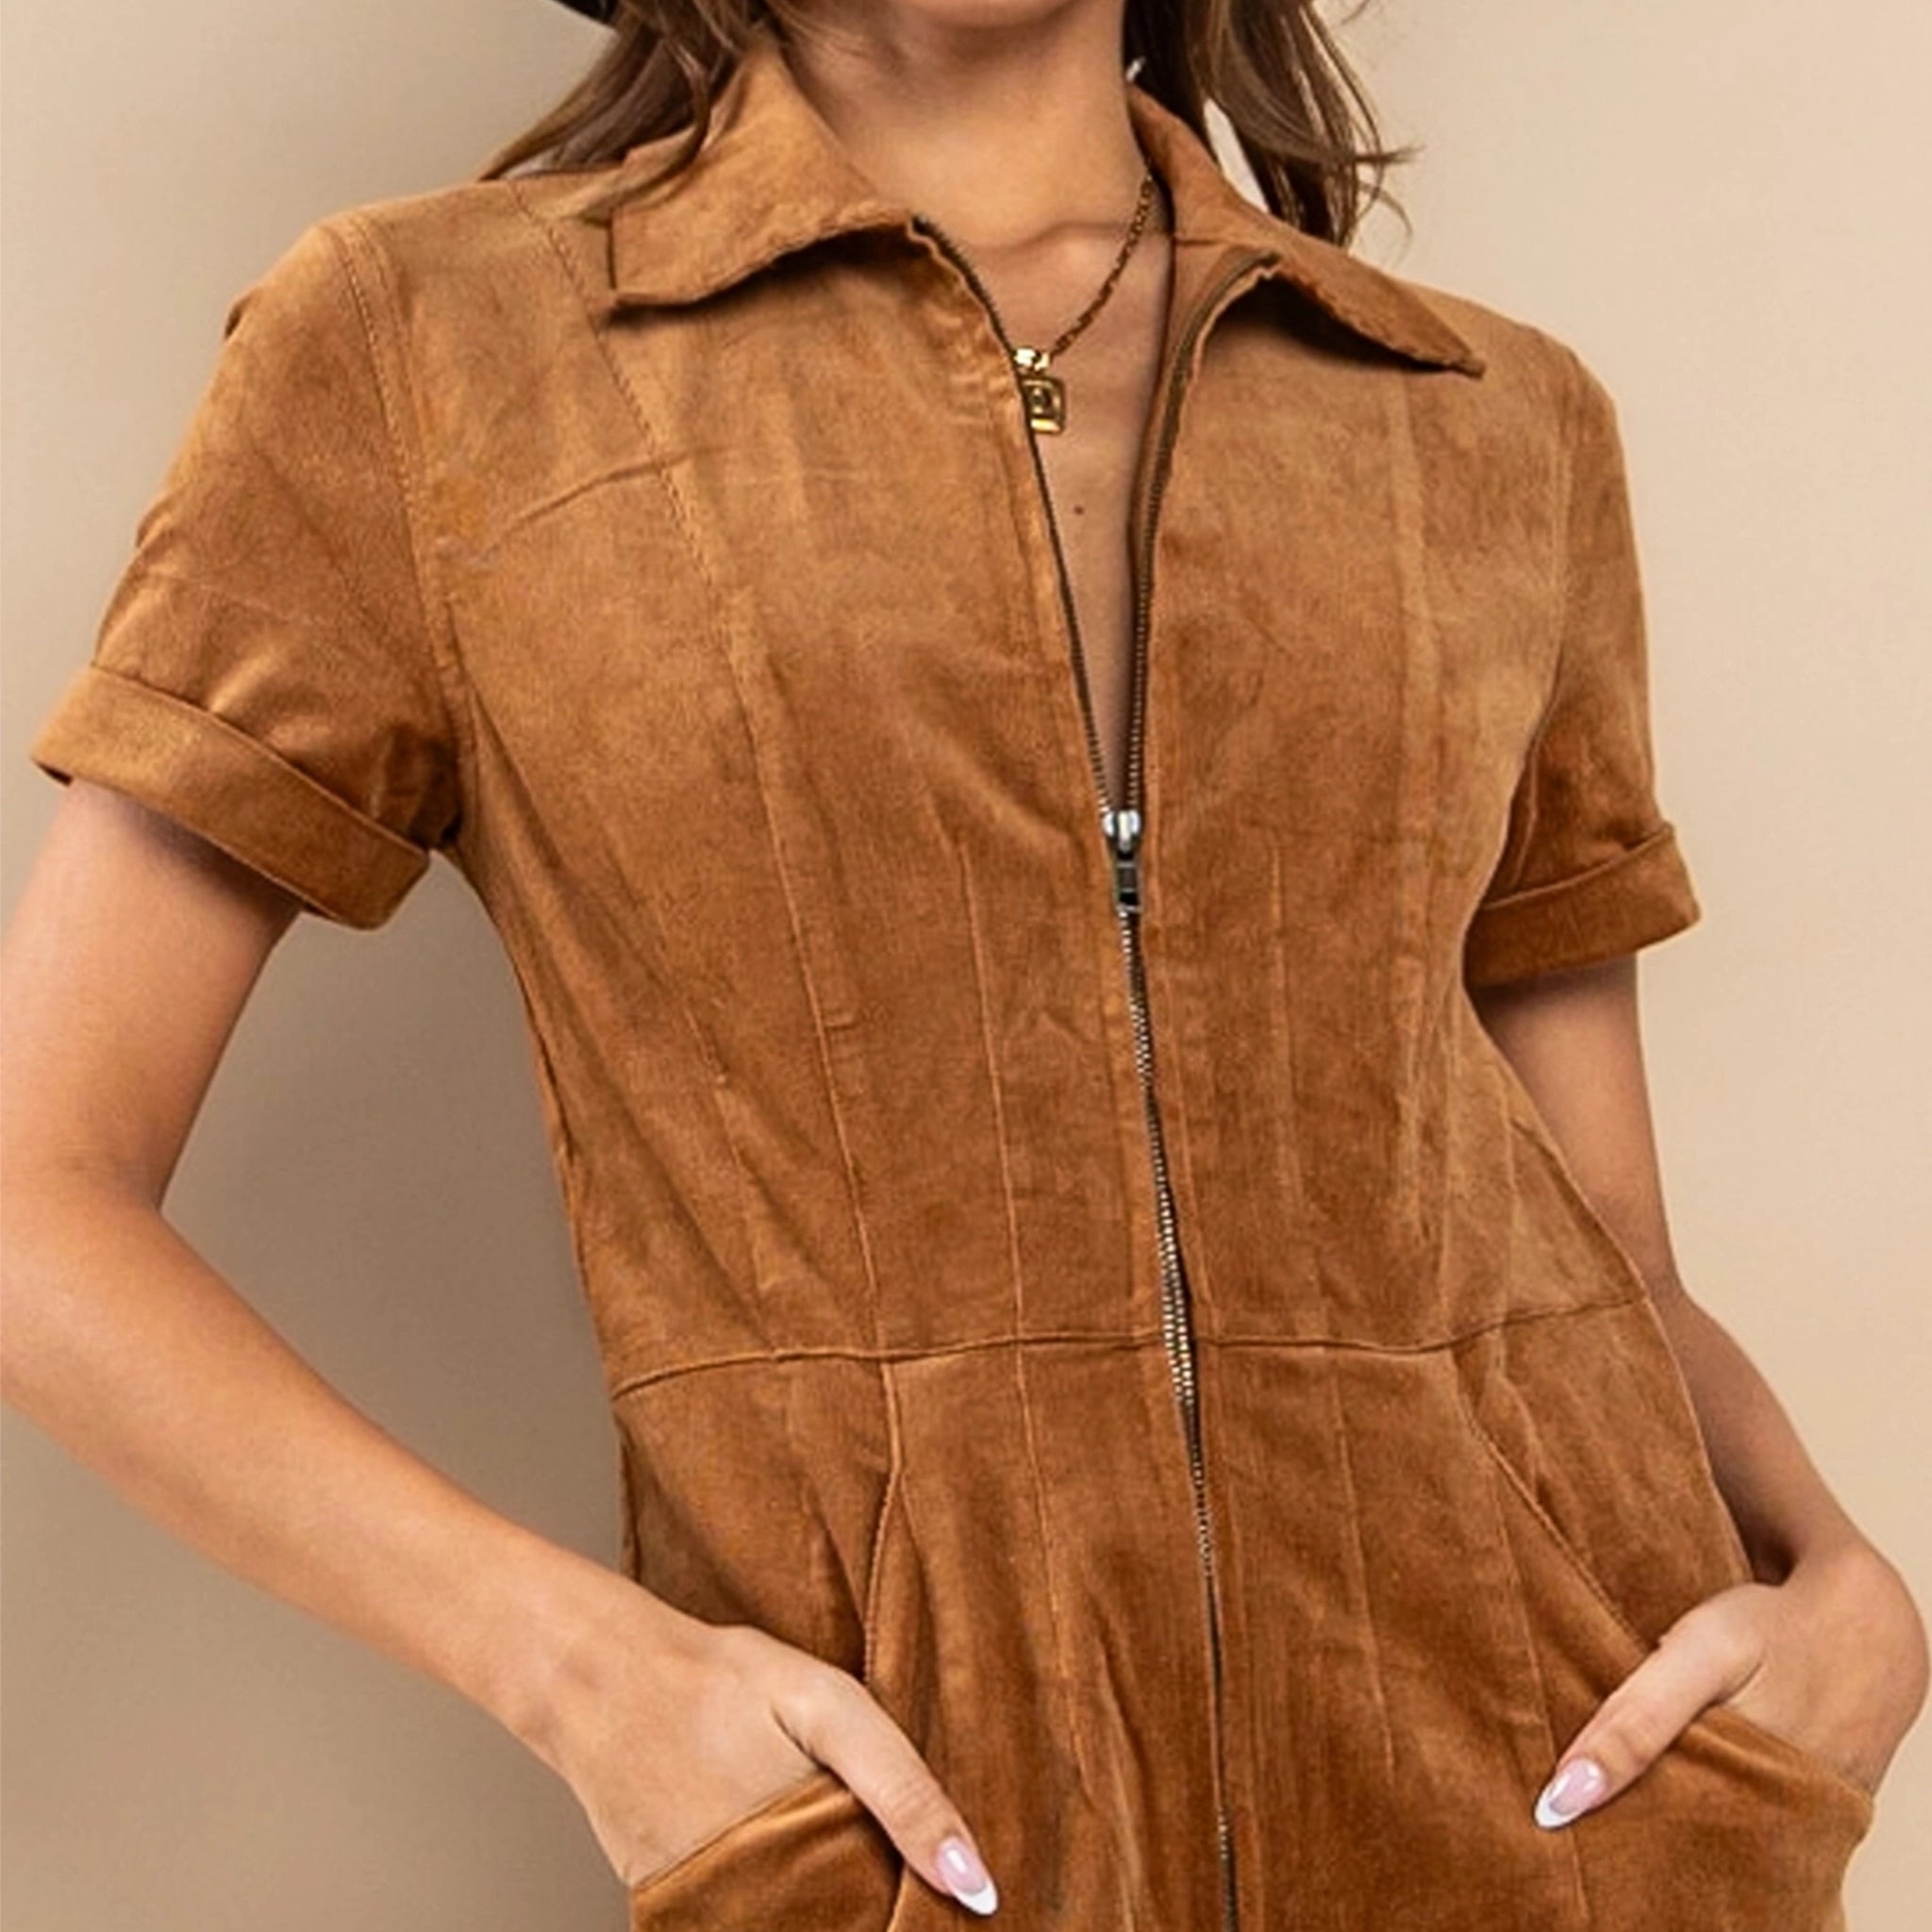 On a tan background is a short sleeved zipper jumpsuit in a camel shade.